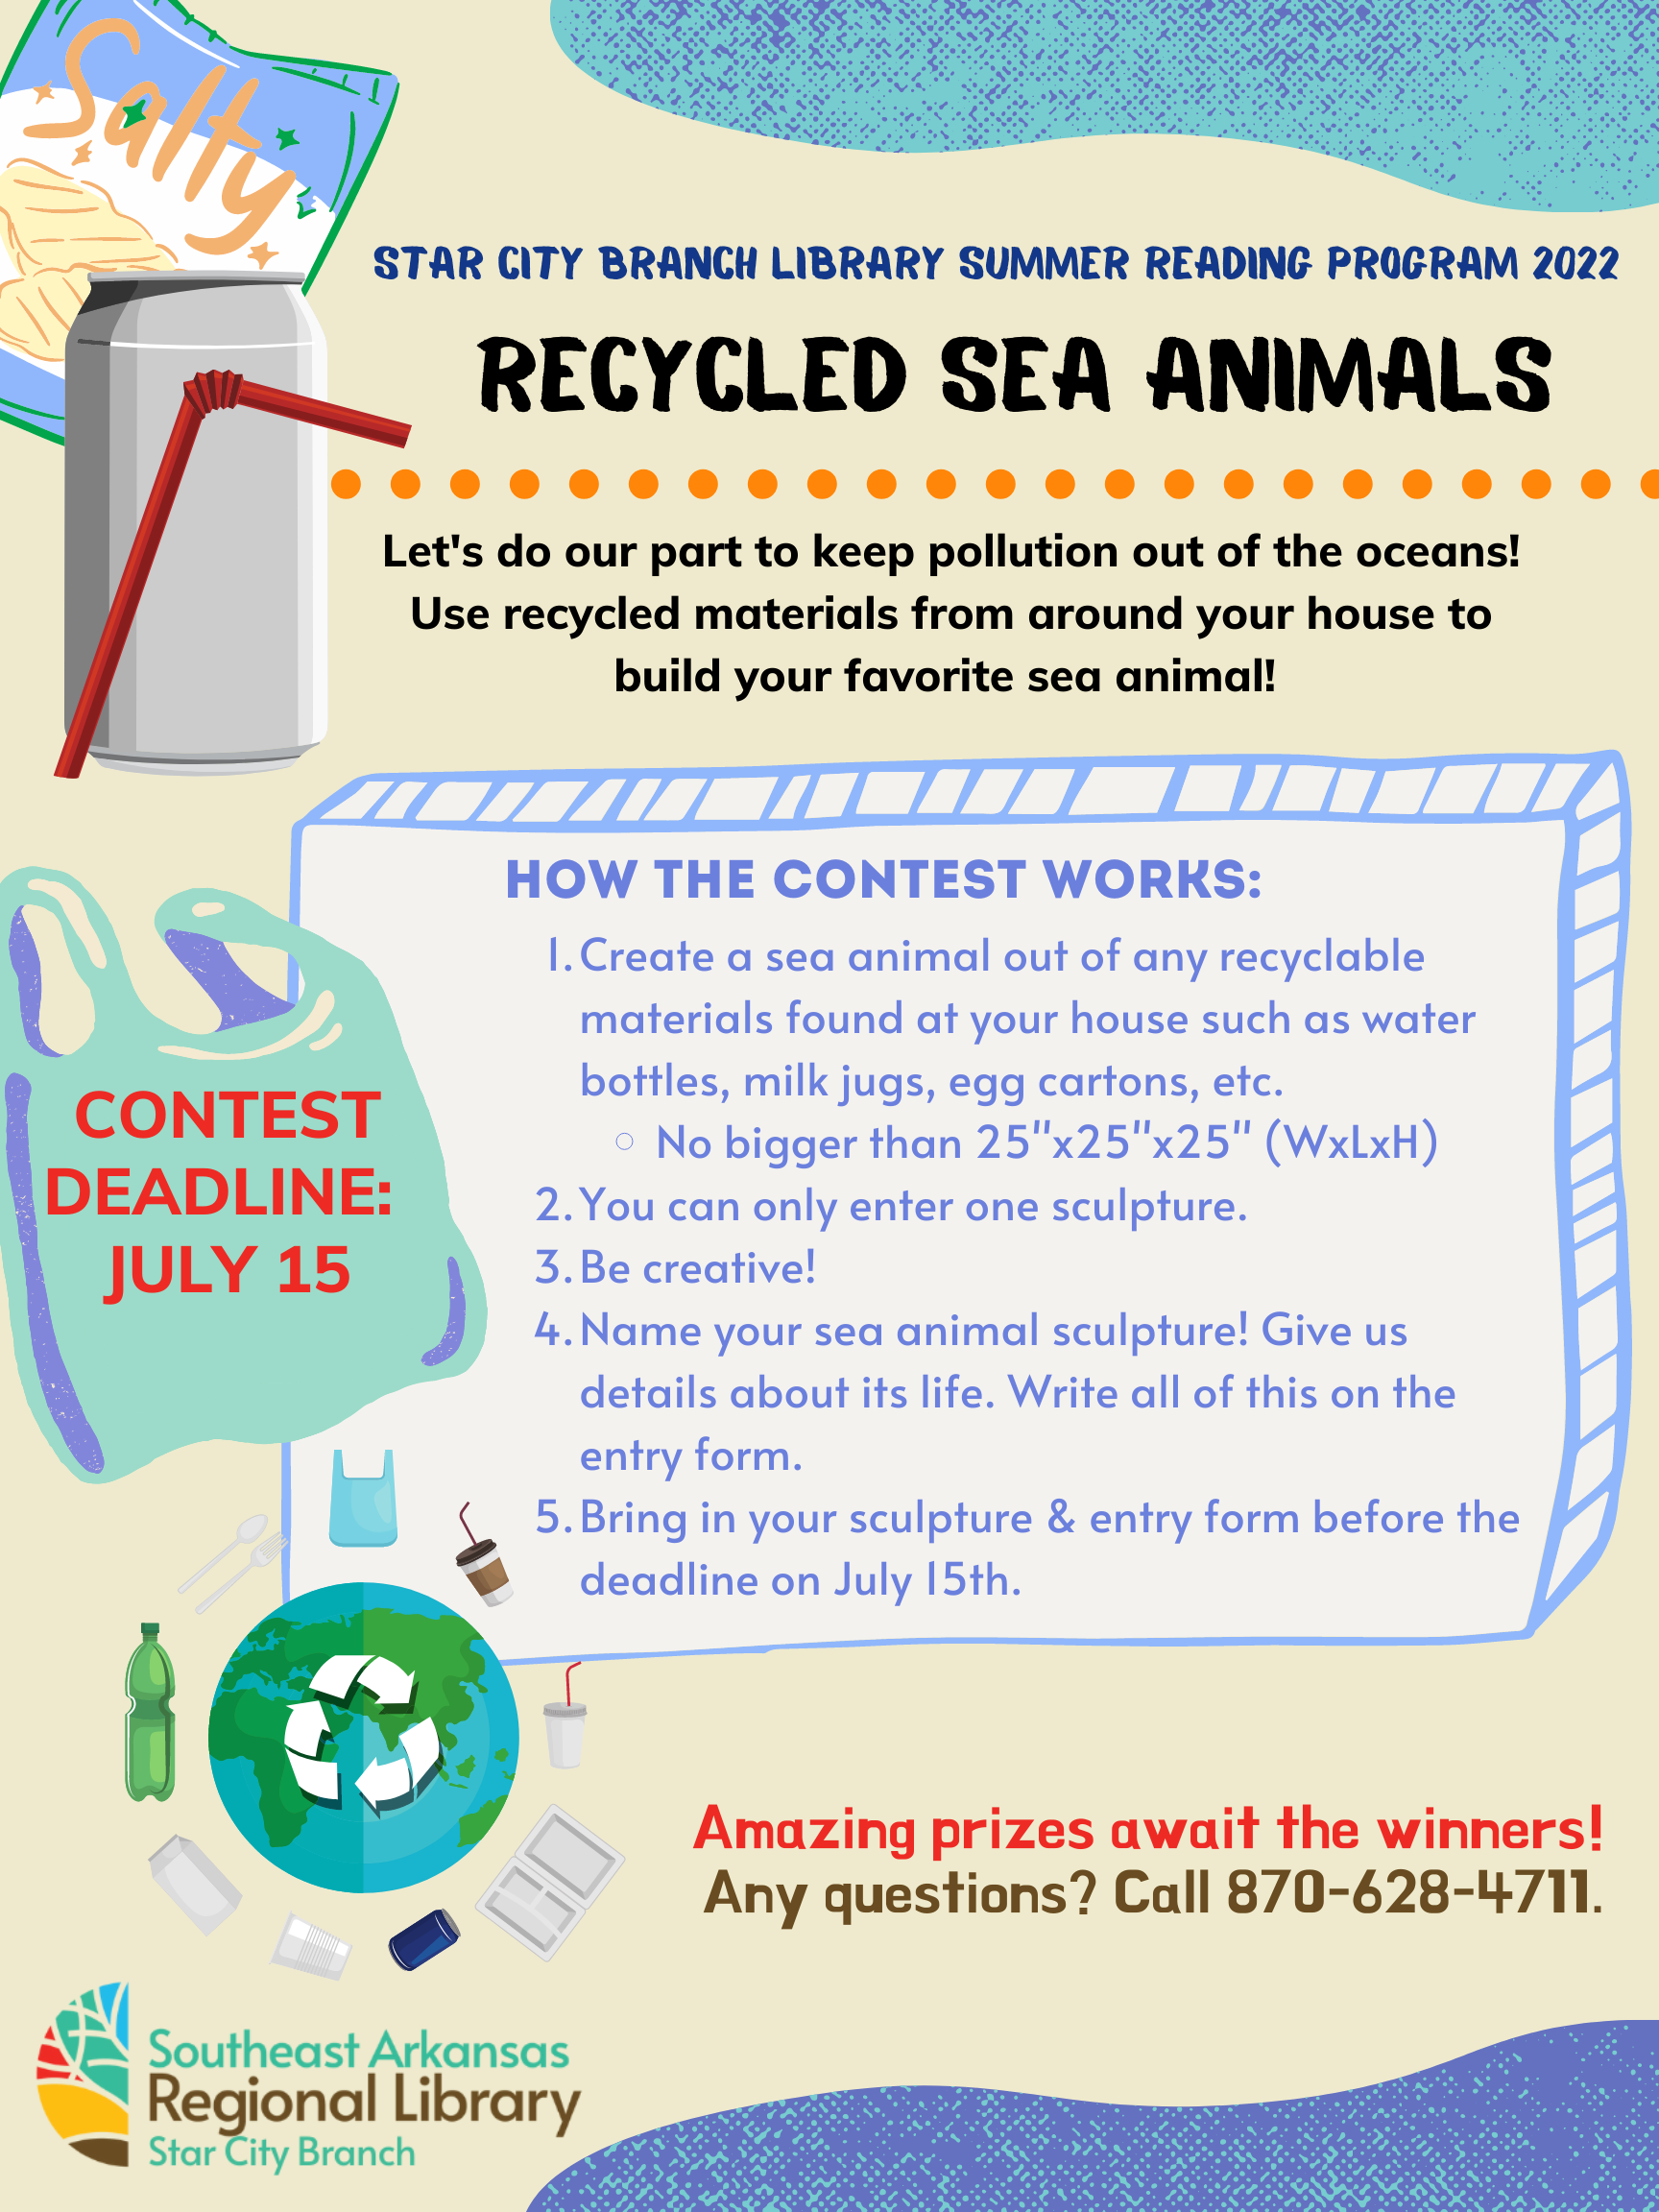 Sculpture contest info with recycled materials at home.